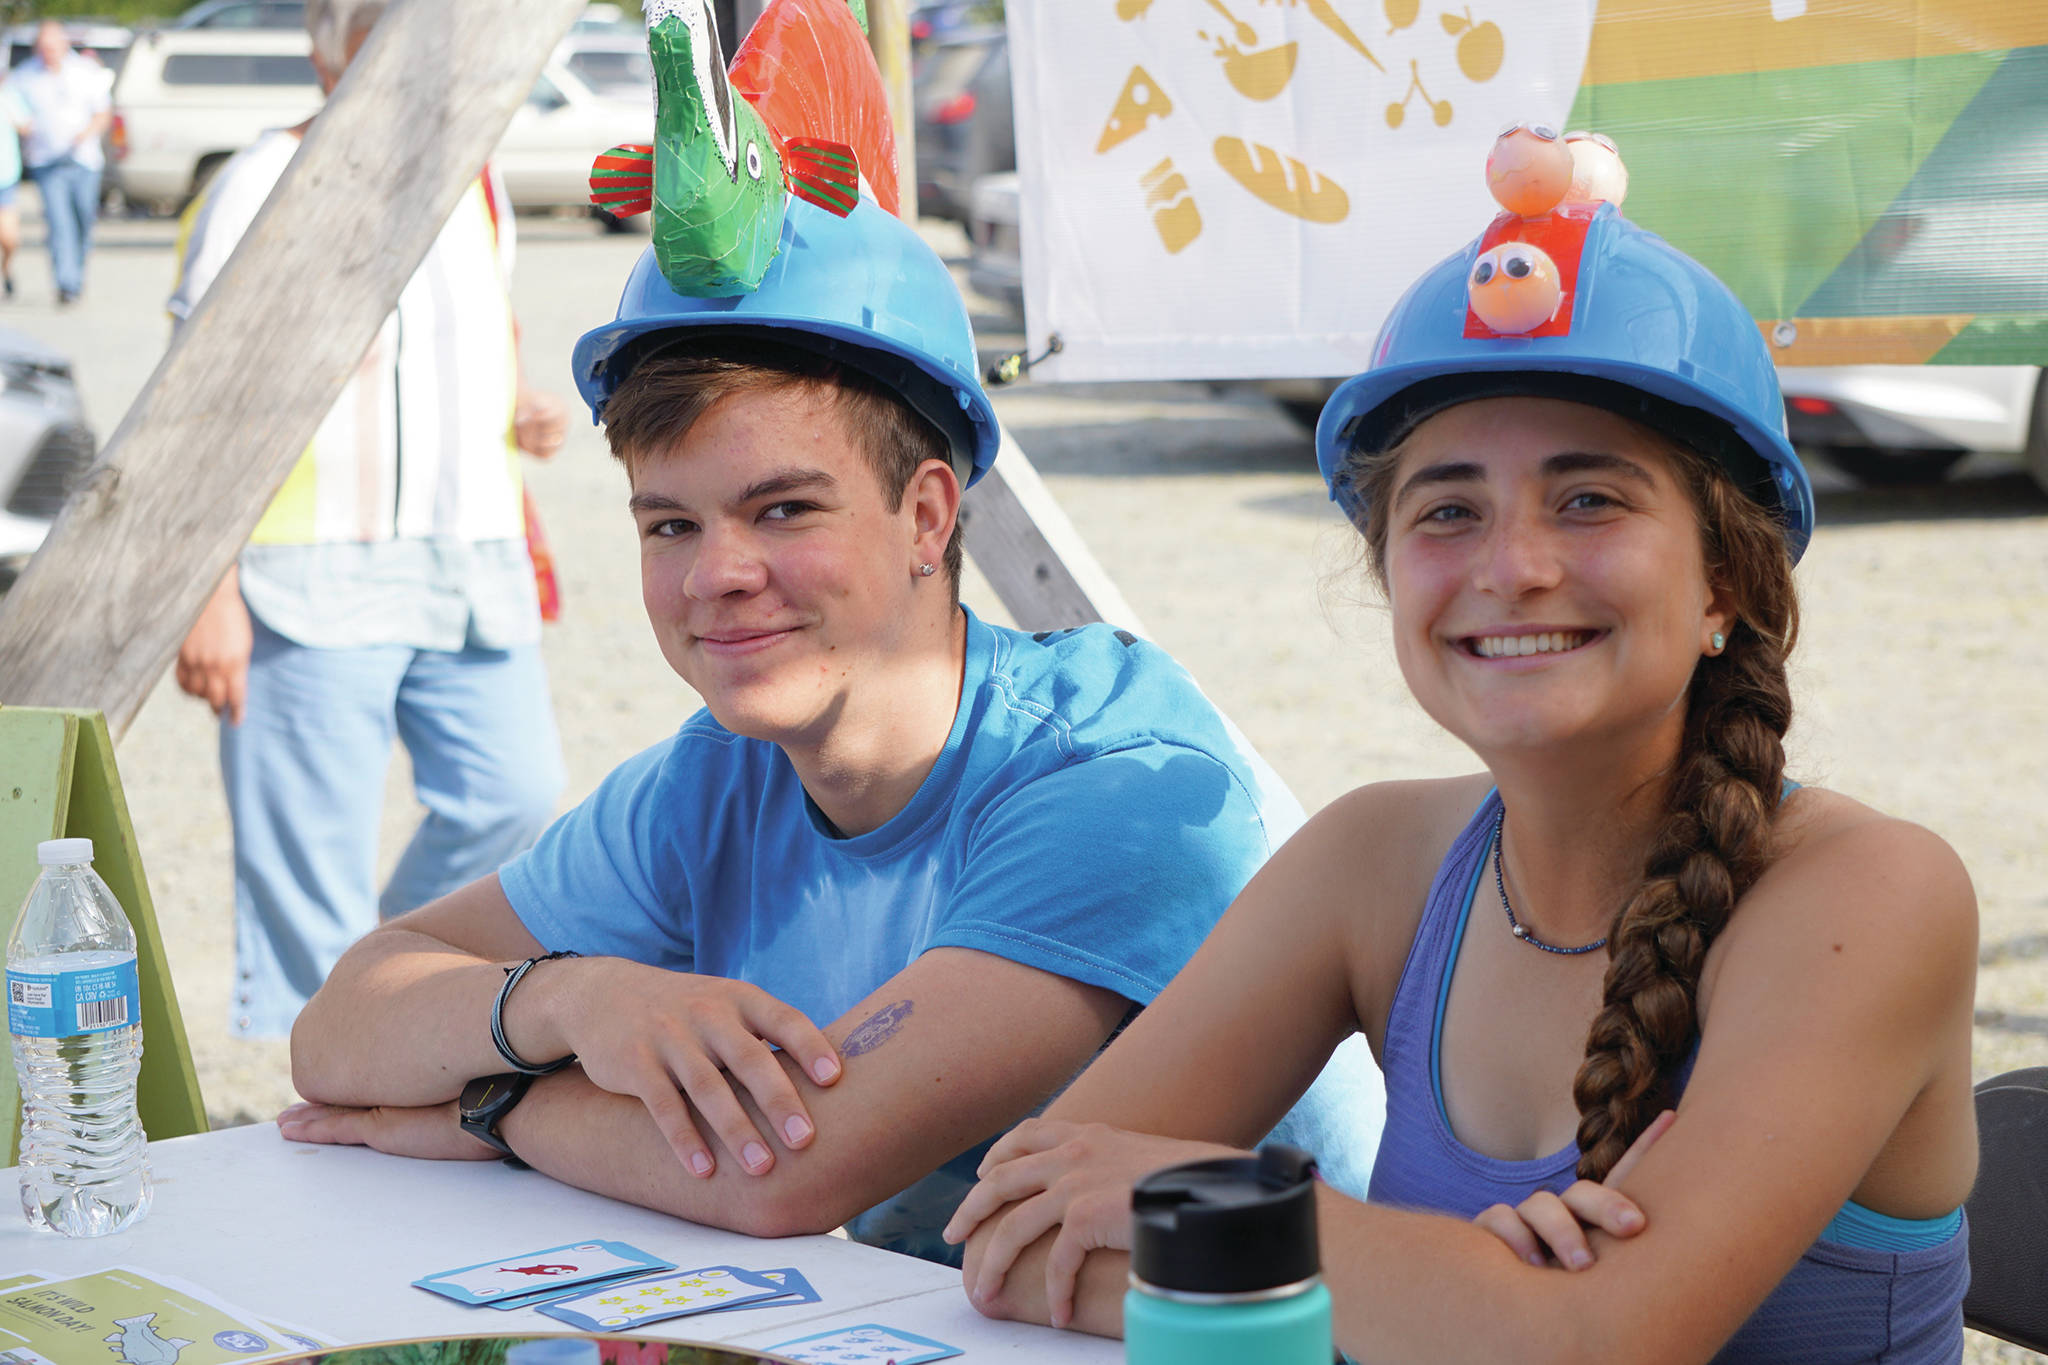 Eli Arbogast, left, and Rosie Skovron, right, staff a table on Saturday, Aug. 10, 2019, for Alaska Wild Salmon Day at the Homer Farmers Market in Homer, Alaska. Arbogast wears a salmon hat and Skovron a hat with “a row of roe,” she said. They are summer interns at Cook Inletkeeper. (Photo by Michael Armstrong/Homer News)